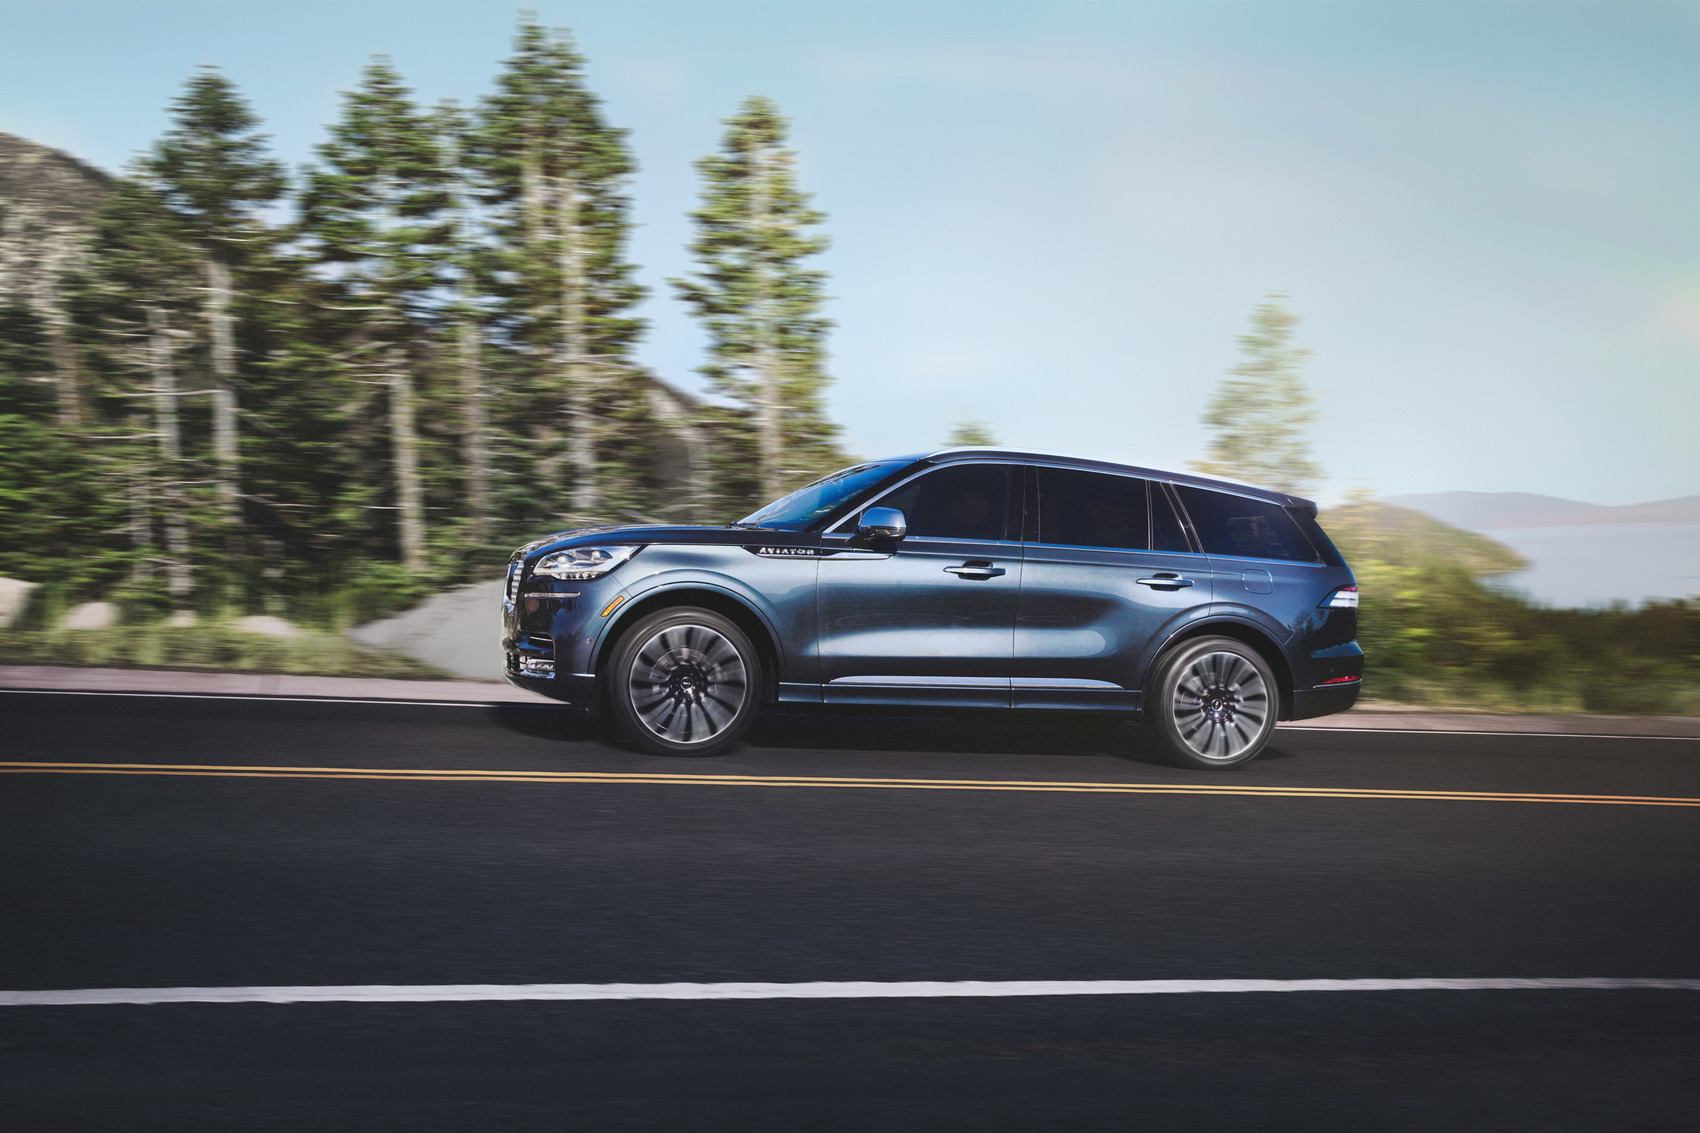 Lincoln scores high in reliability ratings from J.D. Power, but even reliable cars are prone to expensive breakdowns over time. Lincoln’s warranty is better than average among luxury brands, but having additional coverage from a third-party provider may be a good idea. 